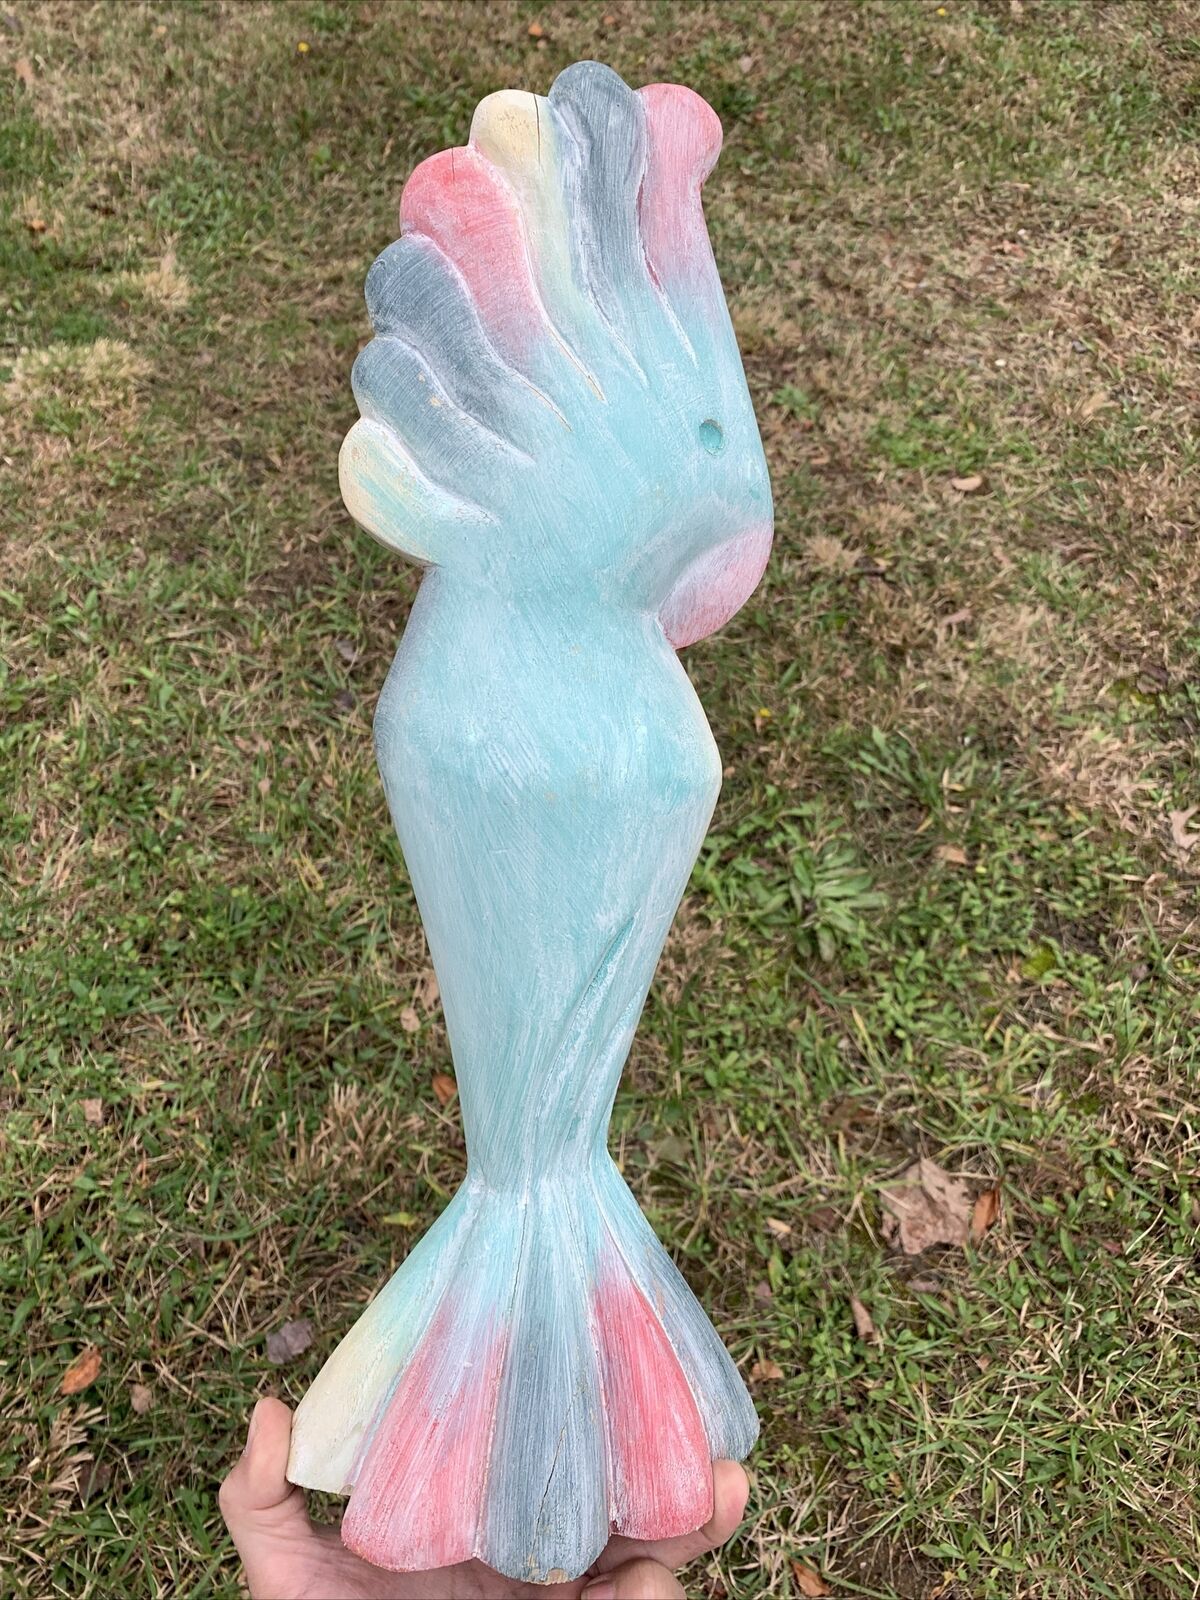 OOAK Rainbow Parrot Key West Jimmy Buffet Paradise Statue Hand Carved ❤️sj11h2s